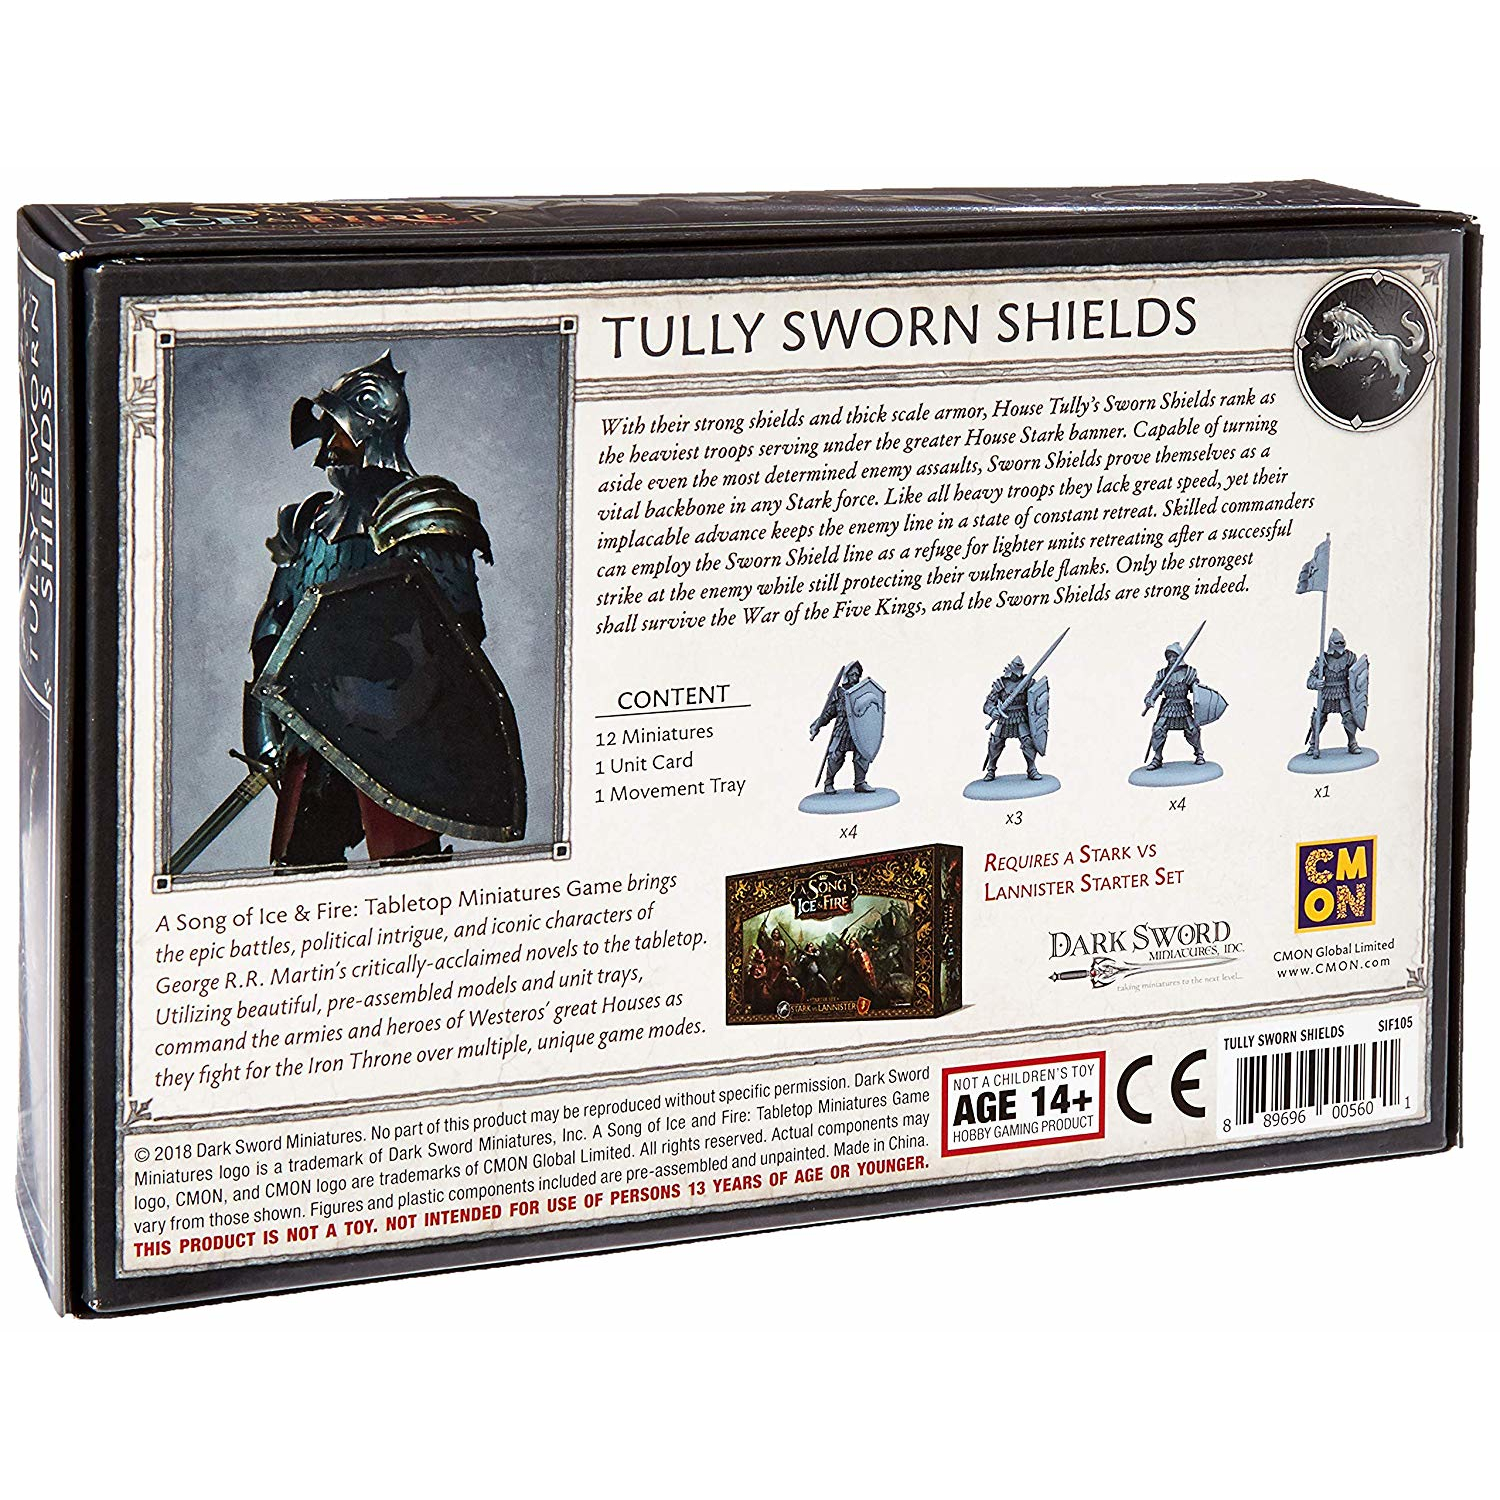 A Song of Ice & Fire: Tabletop Miniatures Game House Stark Tully Sworn Shields Unit Box, by CMON - image 2 of 6